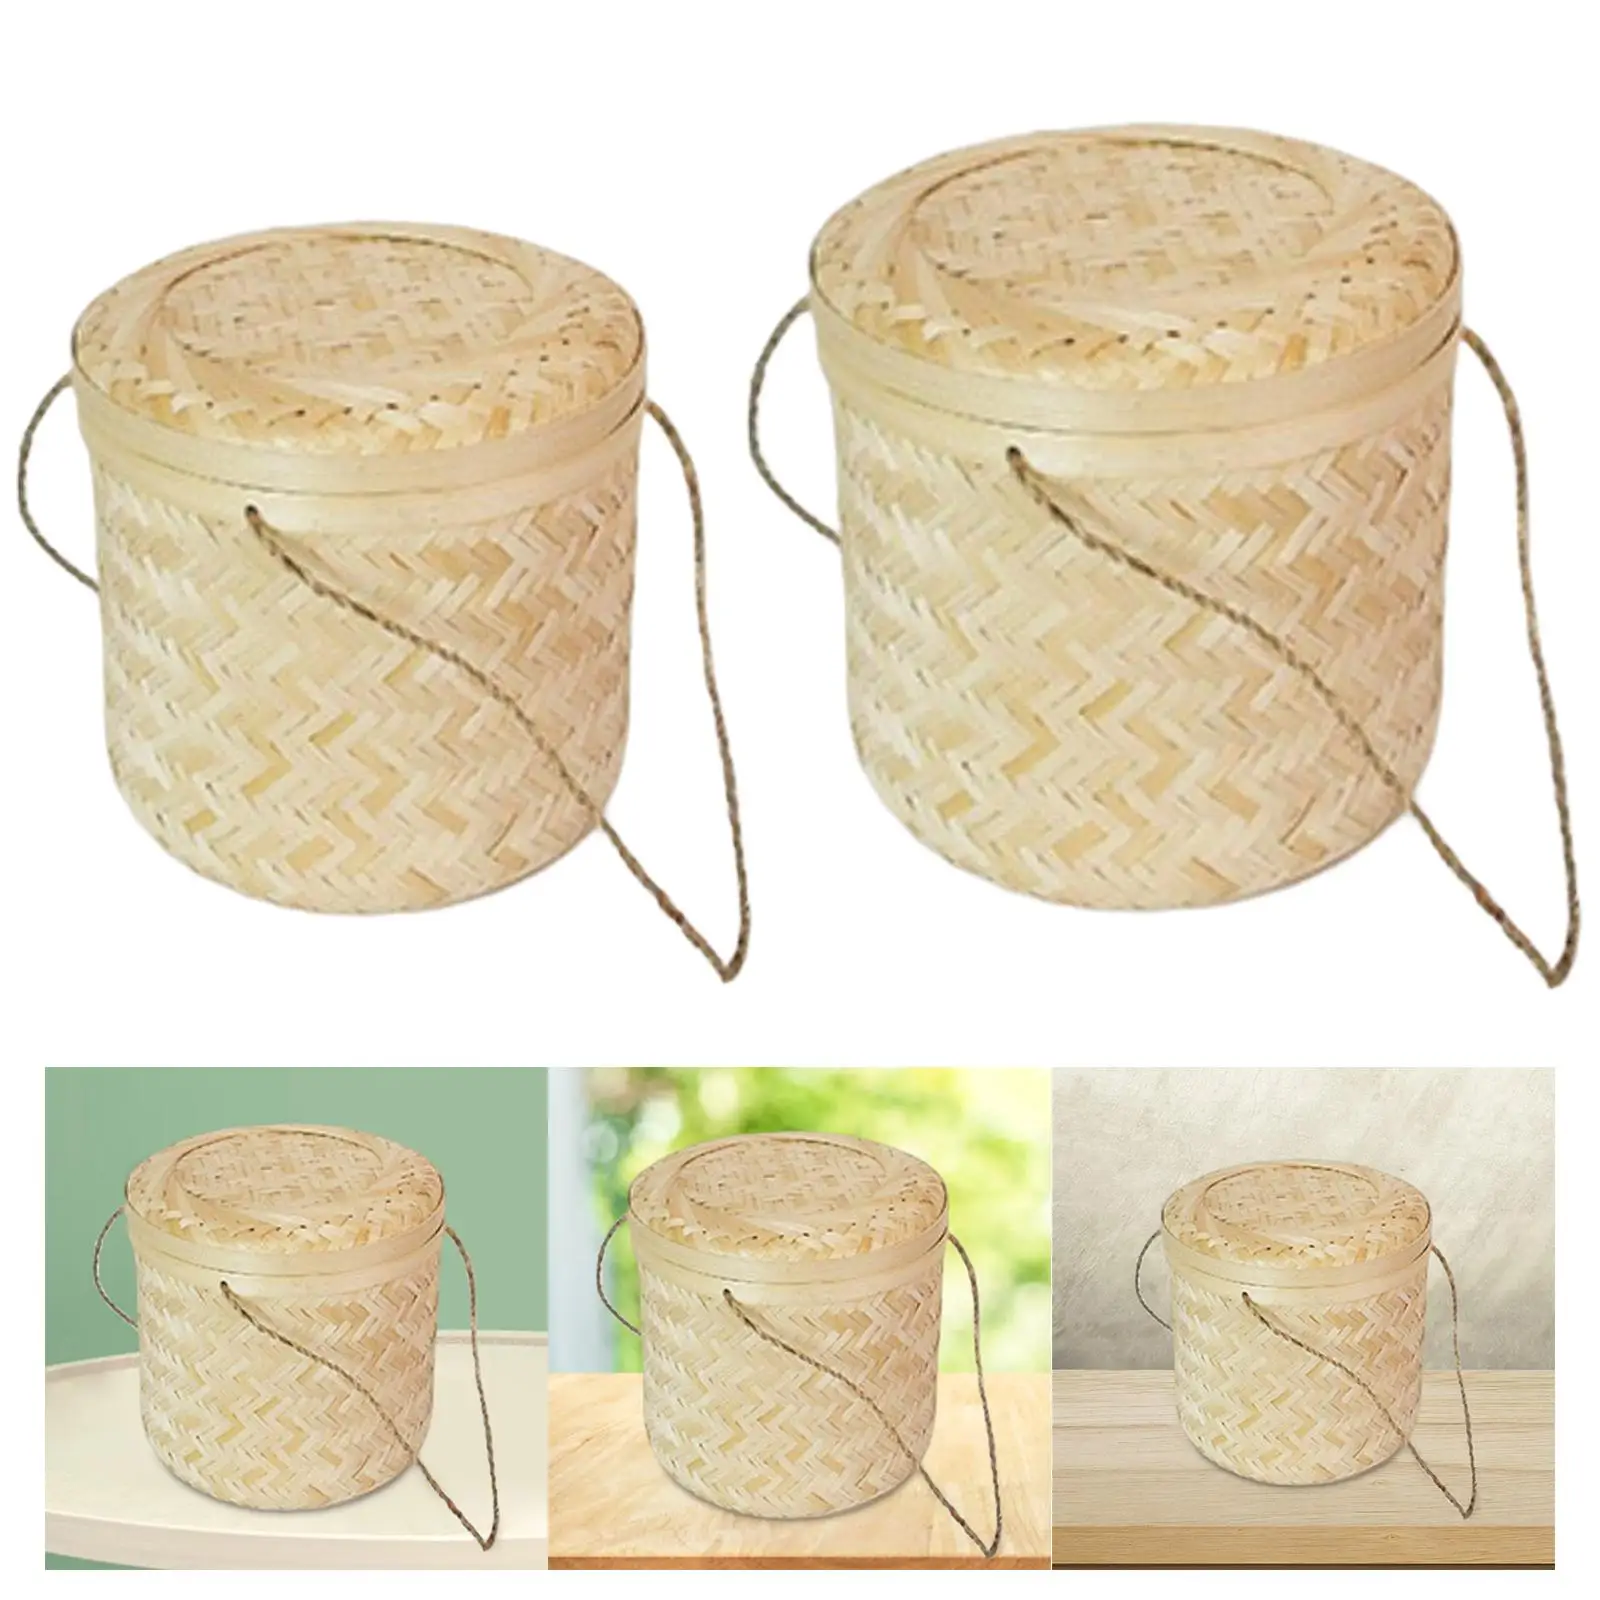 Woven Gift Basket Farmhouse Portable Serving Bamboo Basket with Handle Organizer for Food Bread Snacks Mooncake Fruits